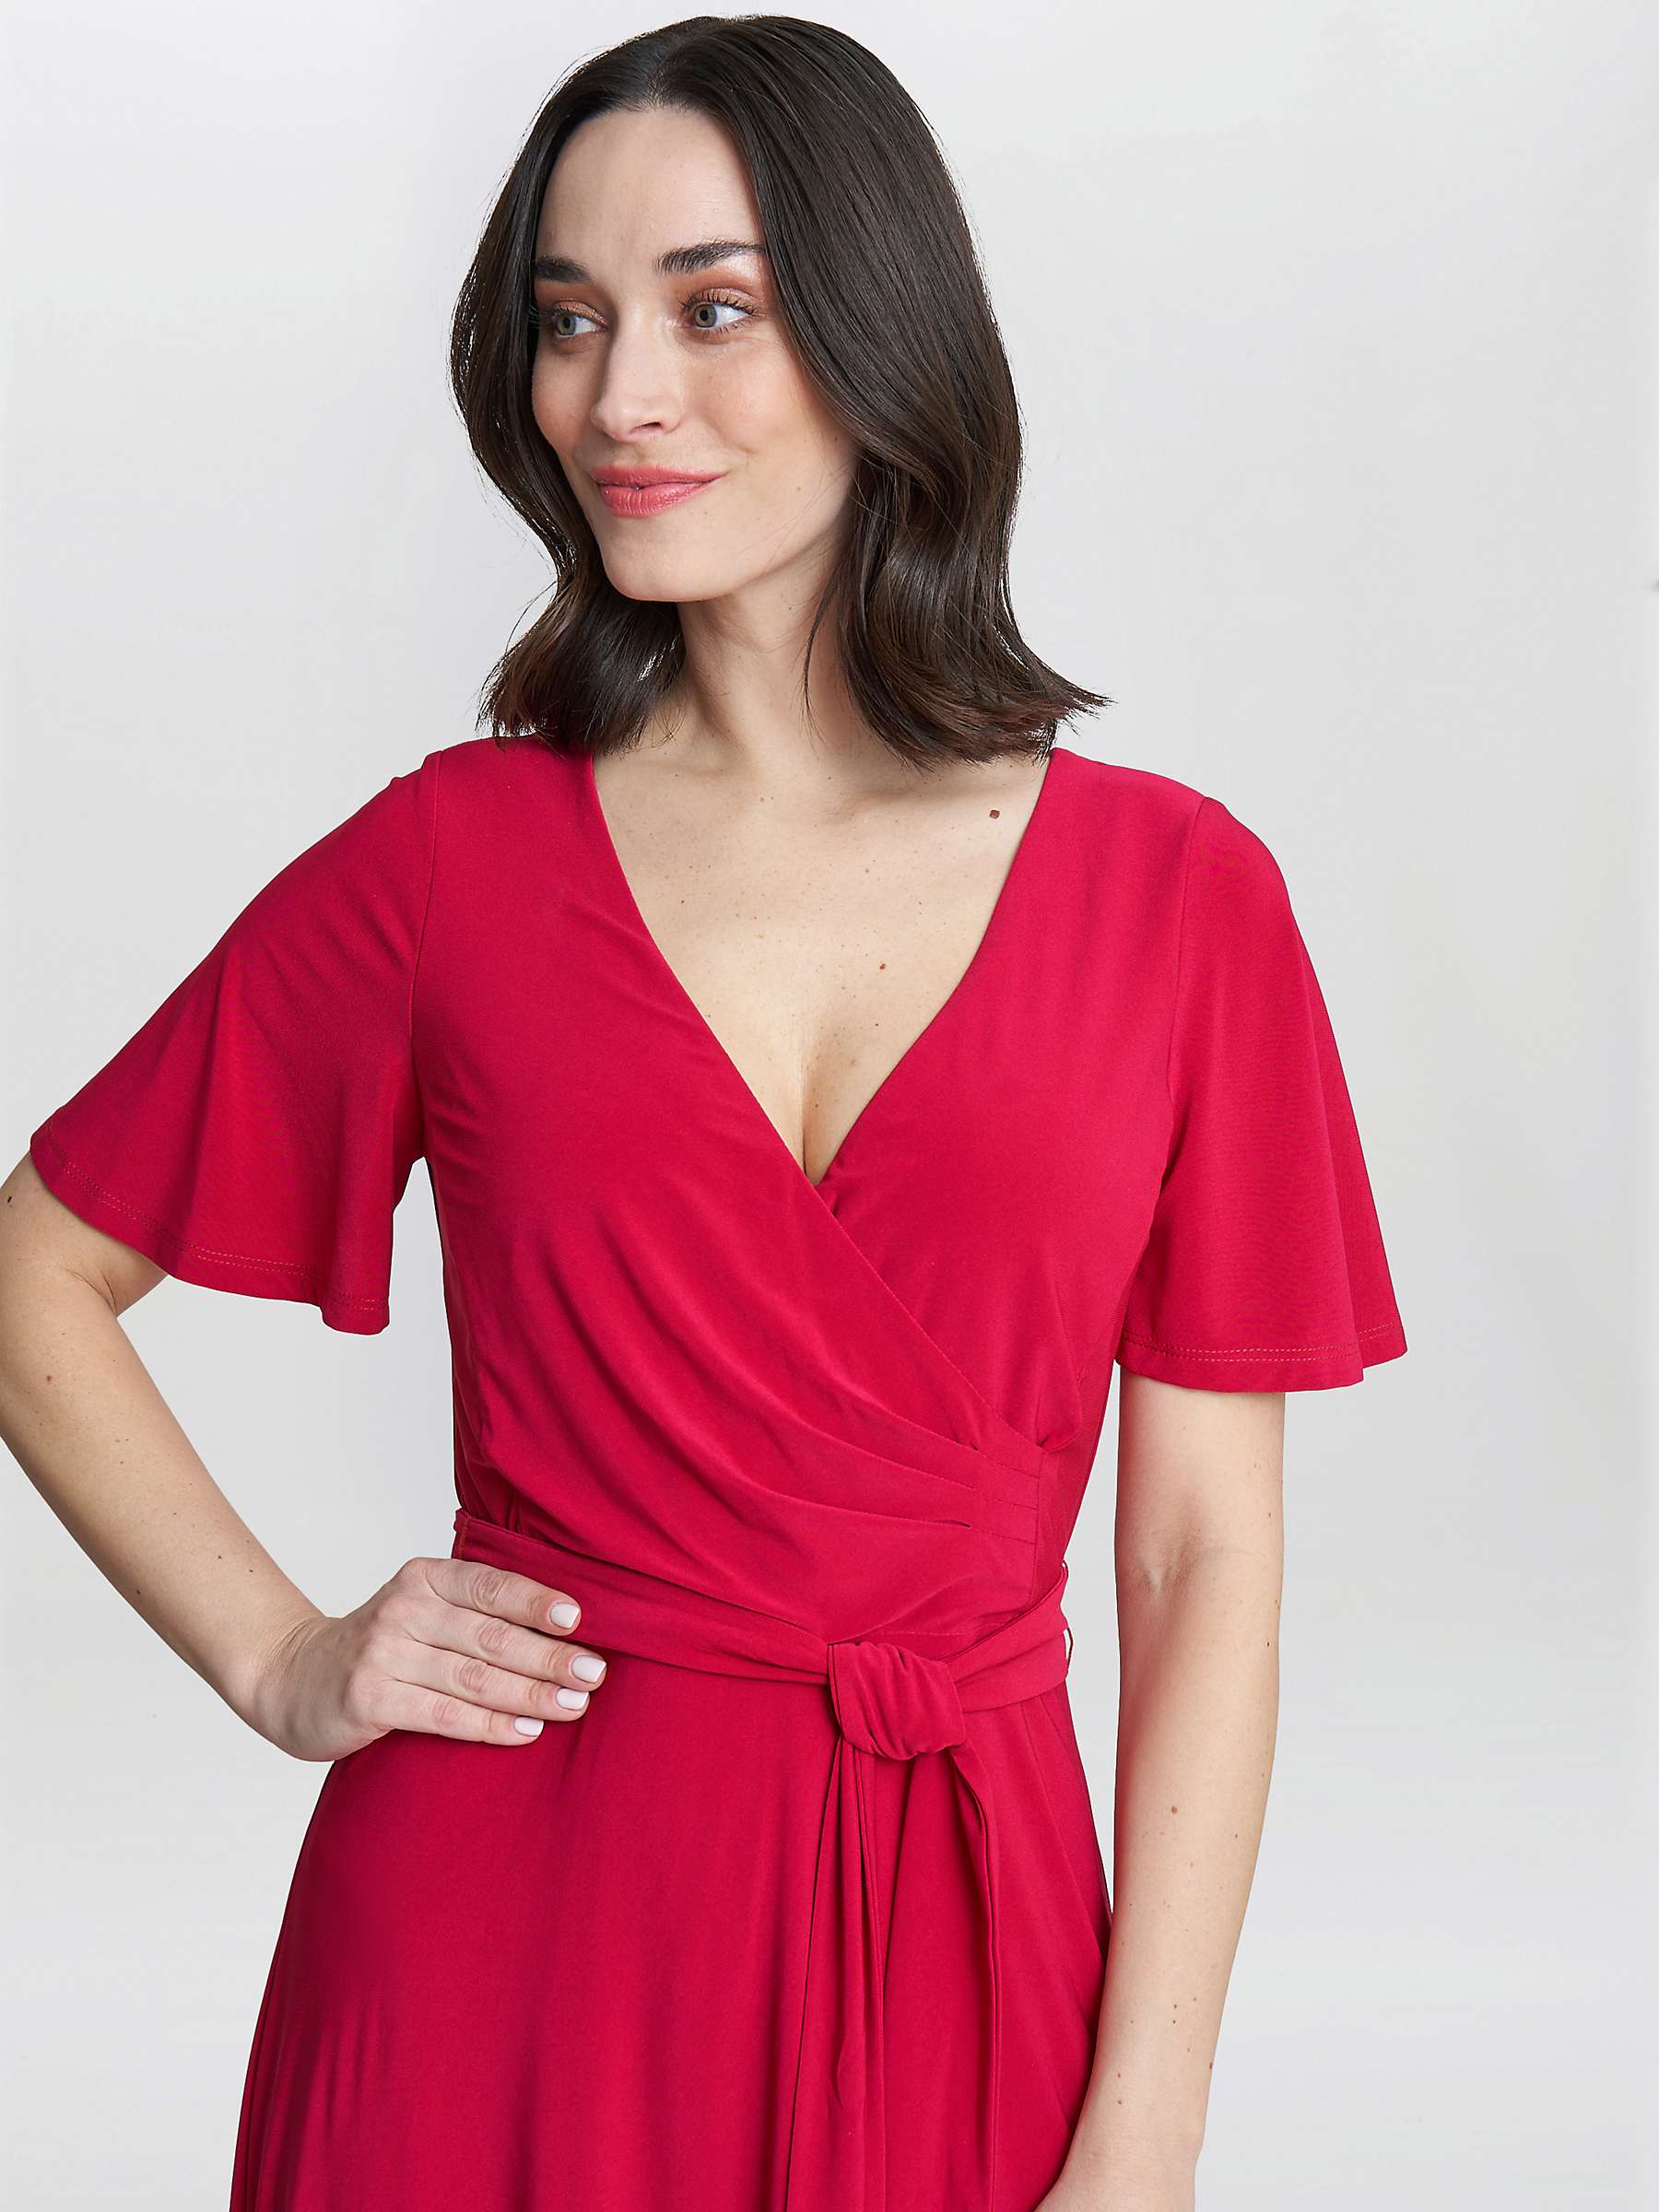 Buy Gina Bacconi Donna Wrap Effect Jersey Dress Online at johnlewis.com